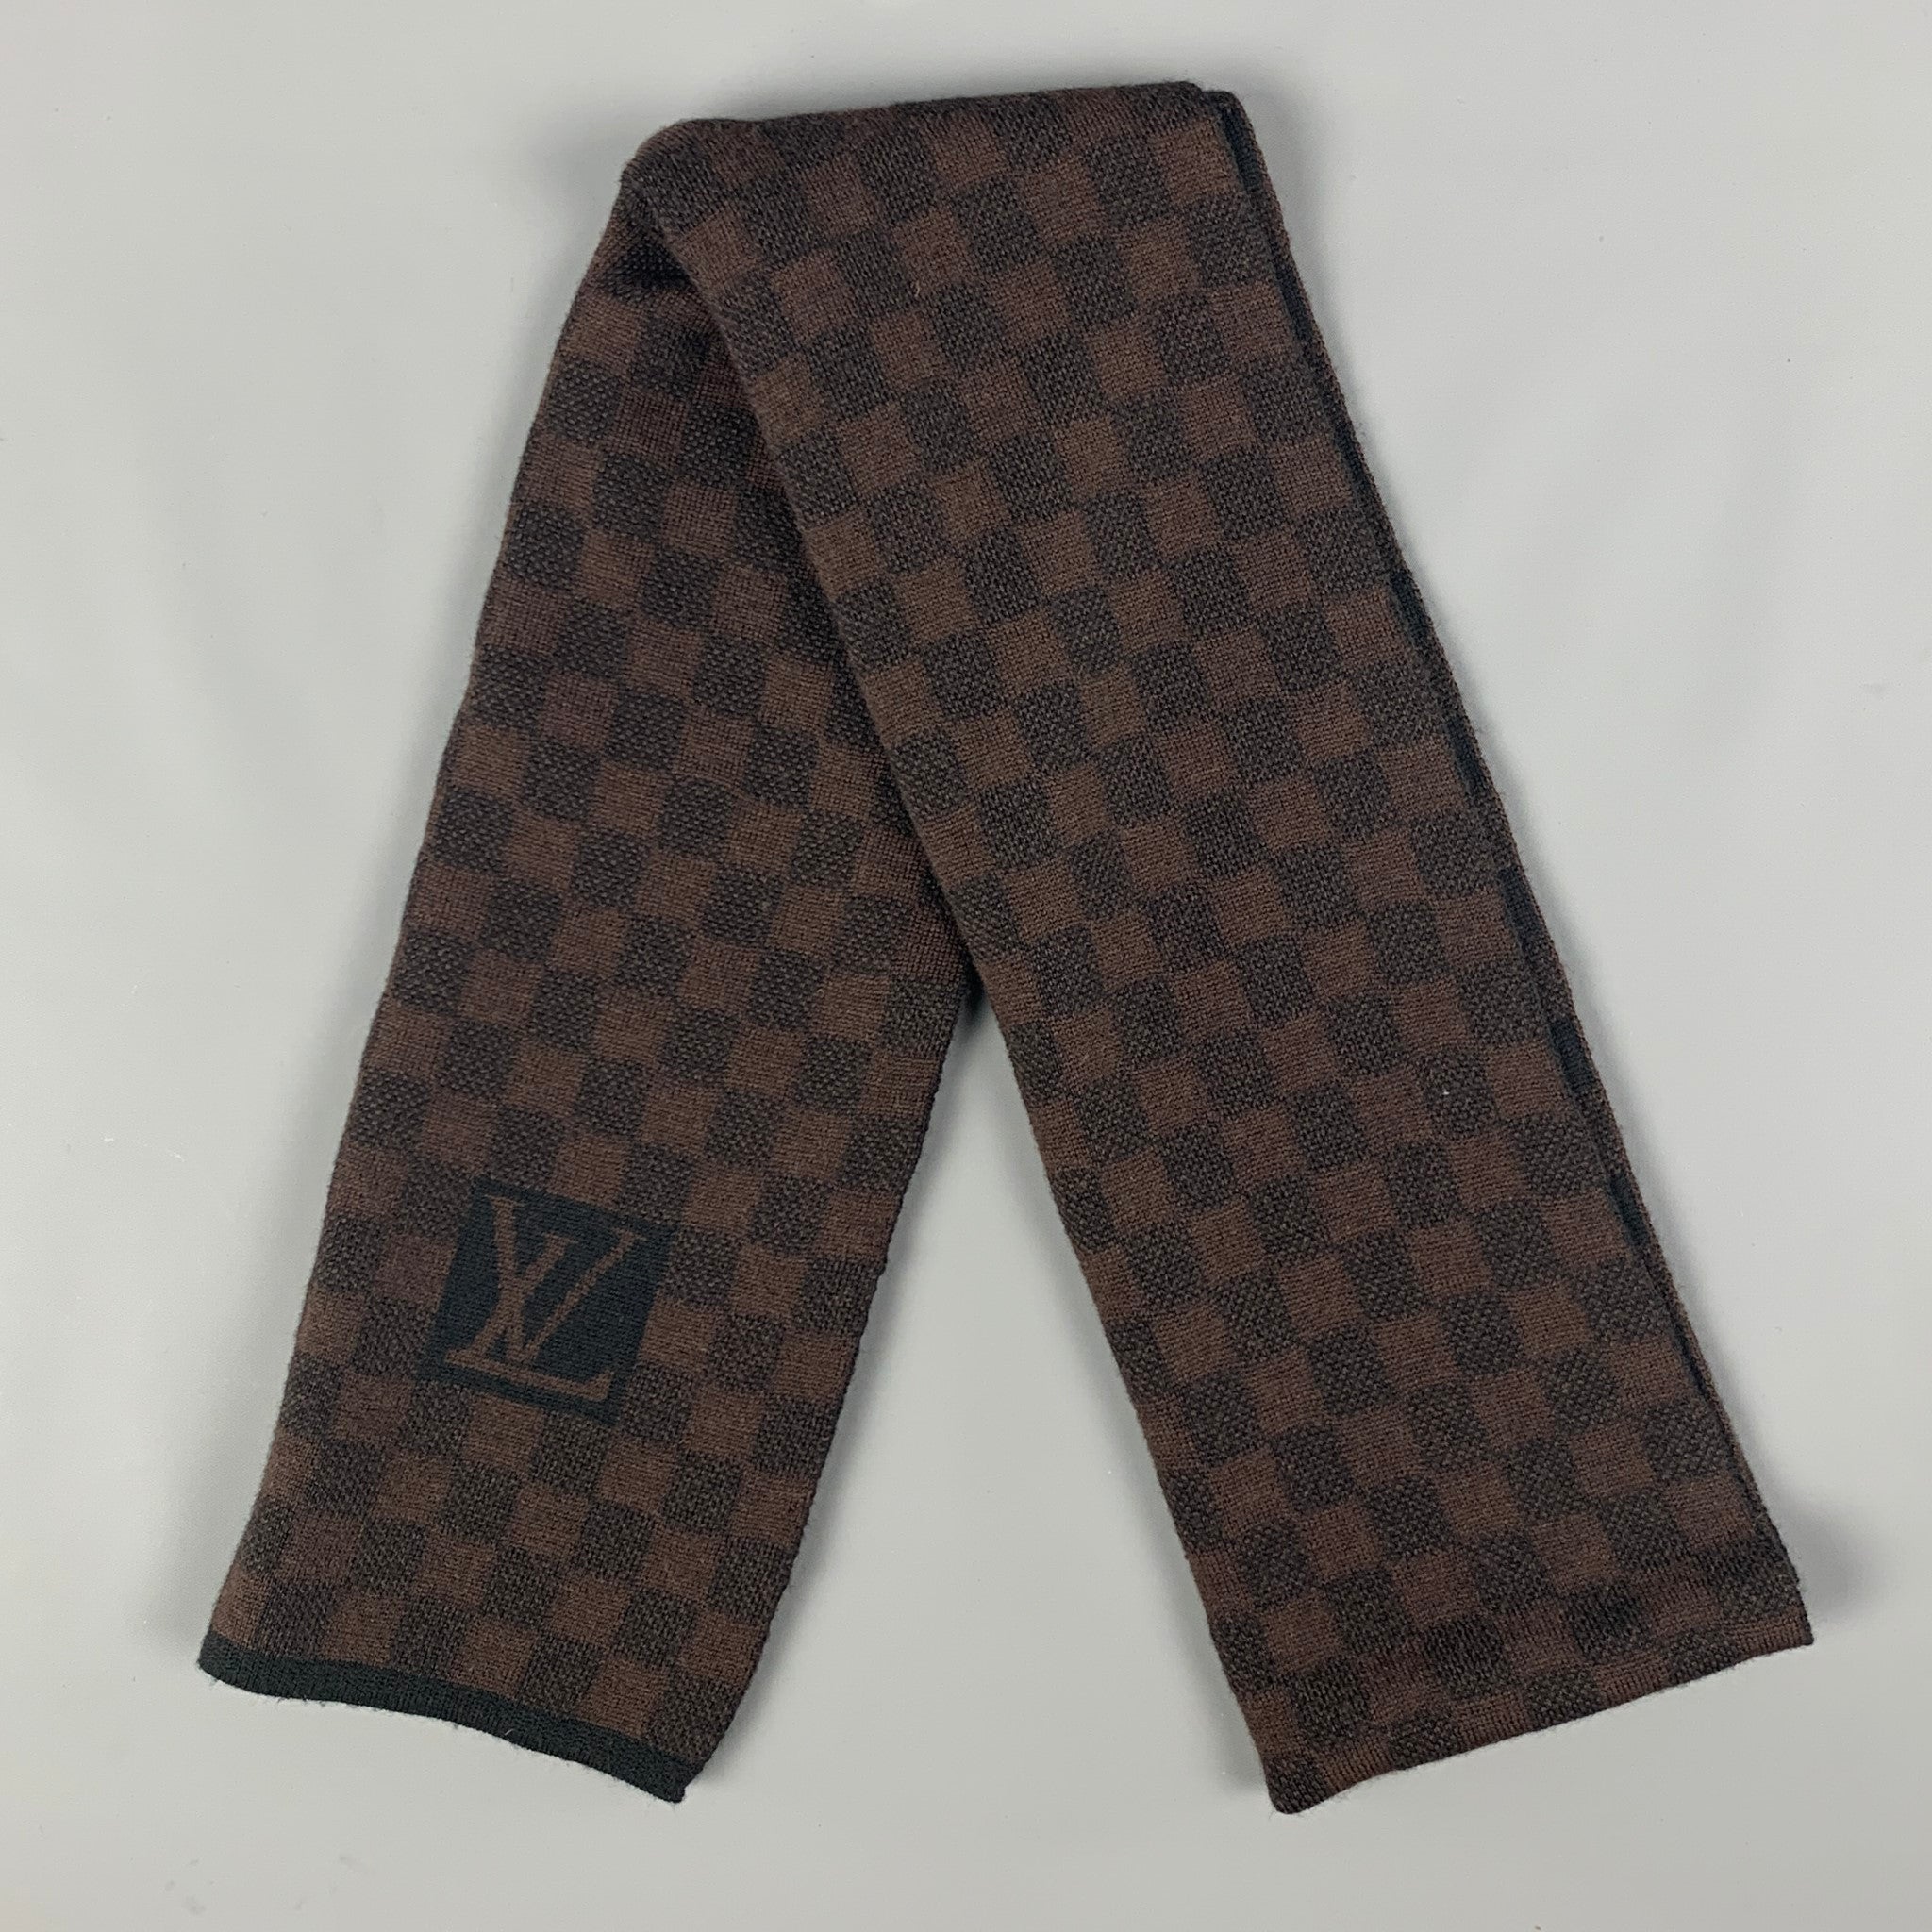 Laura Jean's Consignments - NEW Louis Vuitton Scarf! Current